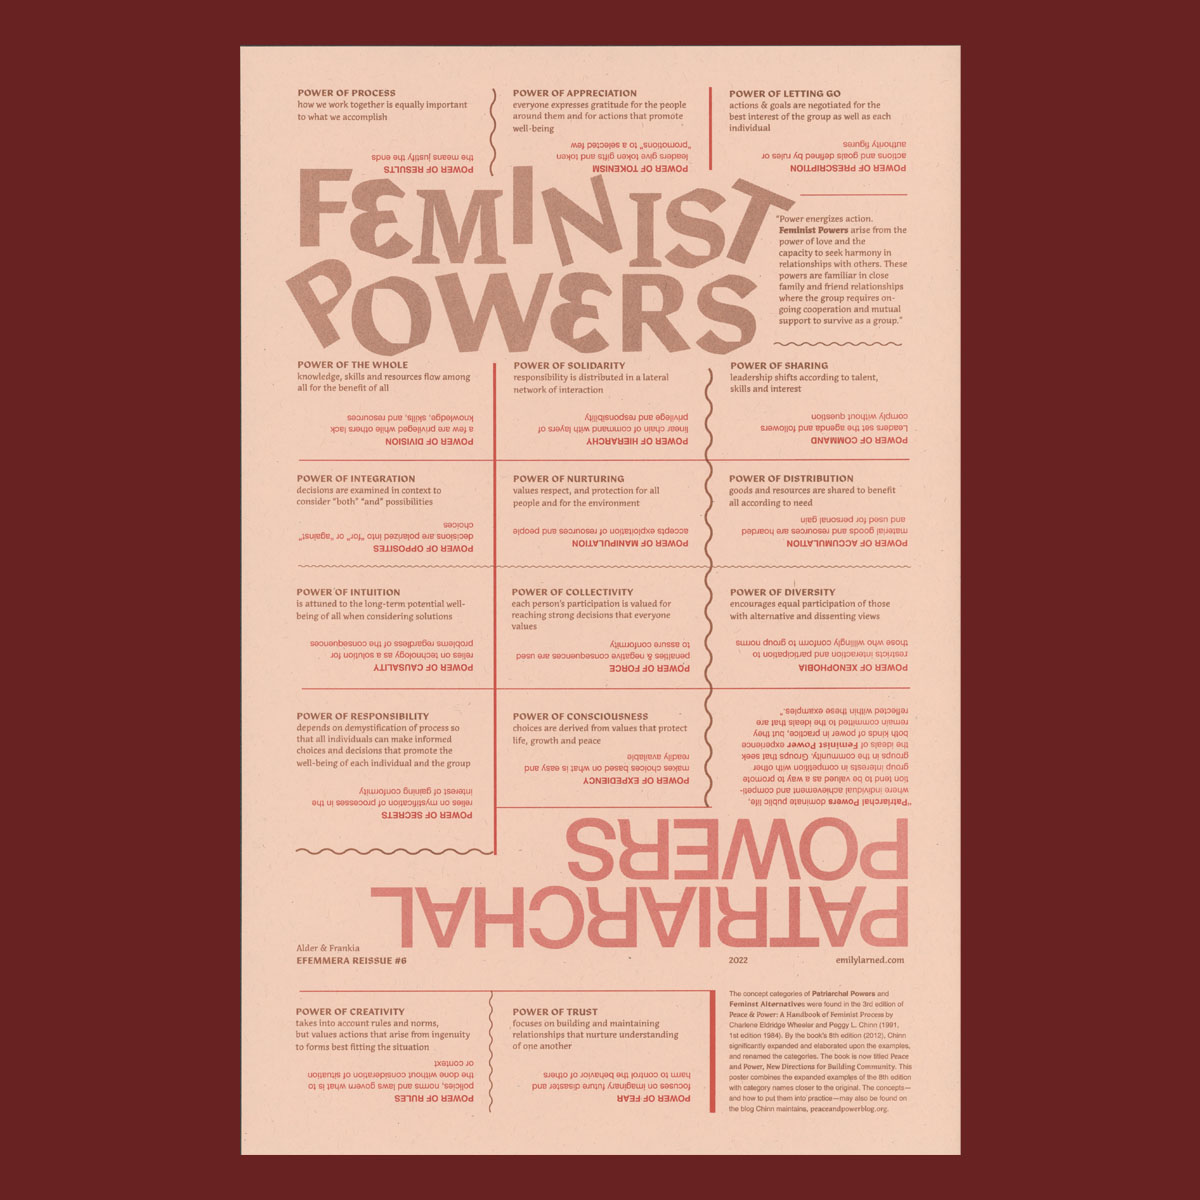 RISO printed poster depicting feminist and patriarchal powers